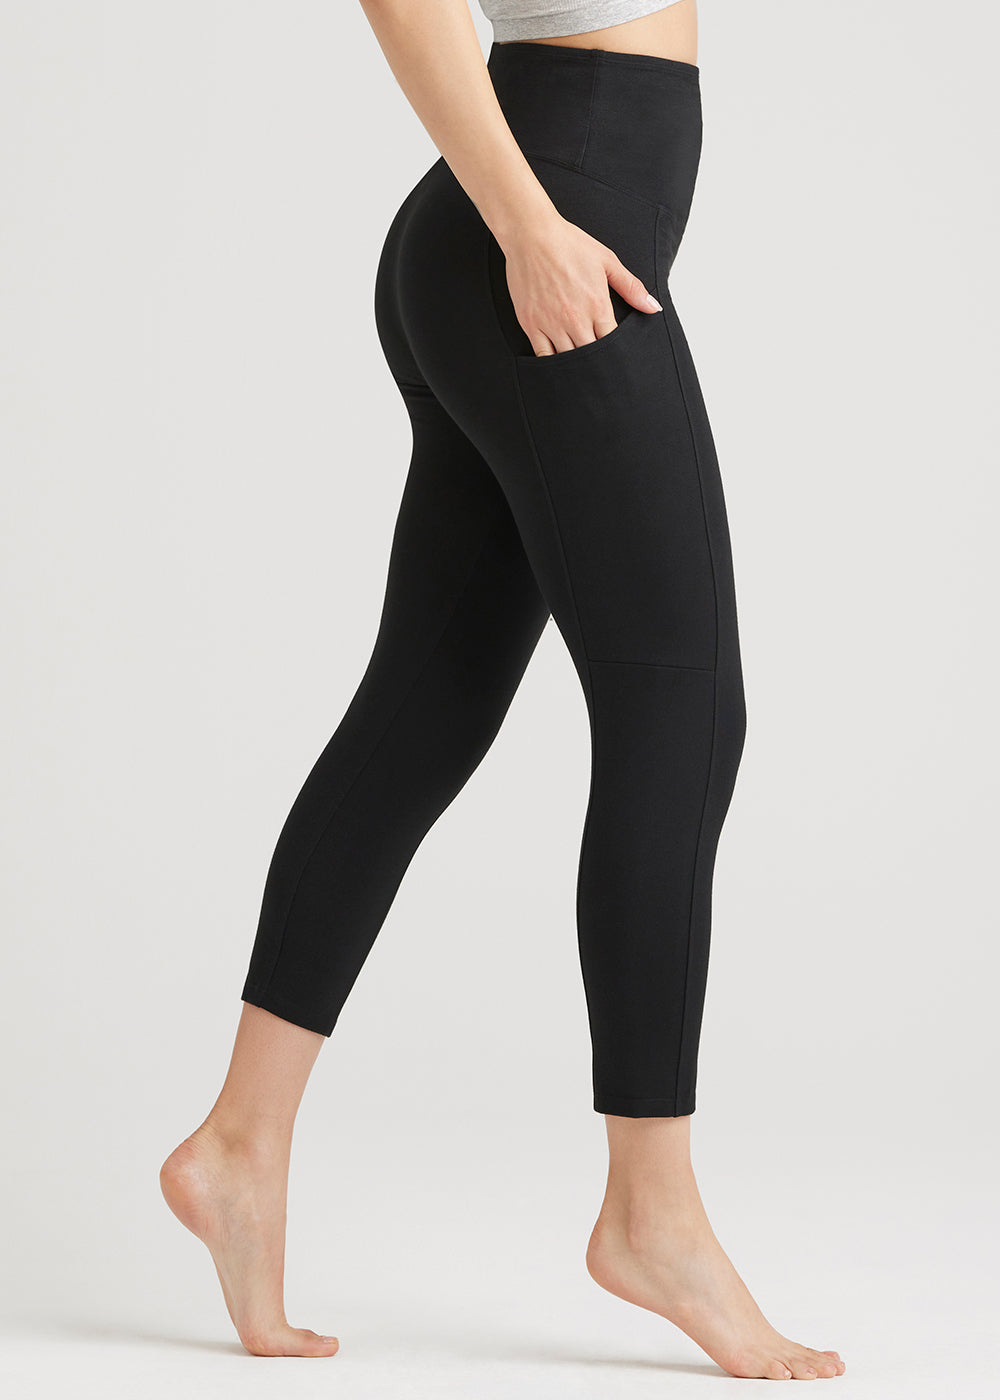 Gorilla Wear Cleveland | Black - Women Sports Track Pants With Zipped  Pockets and Stretchy Fabric | MG Activewear | UAE Fitness & Gym Ecommerce  Store